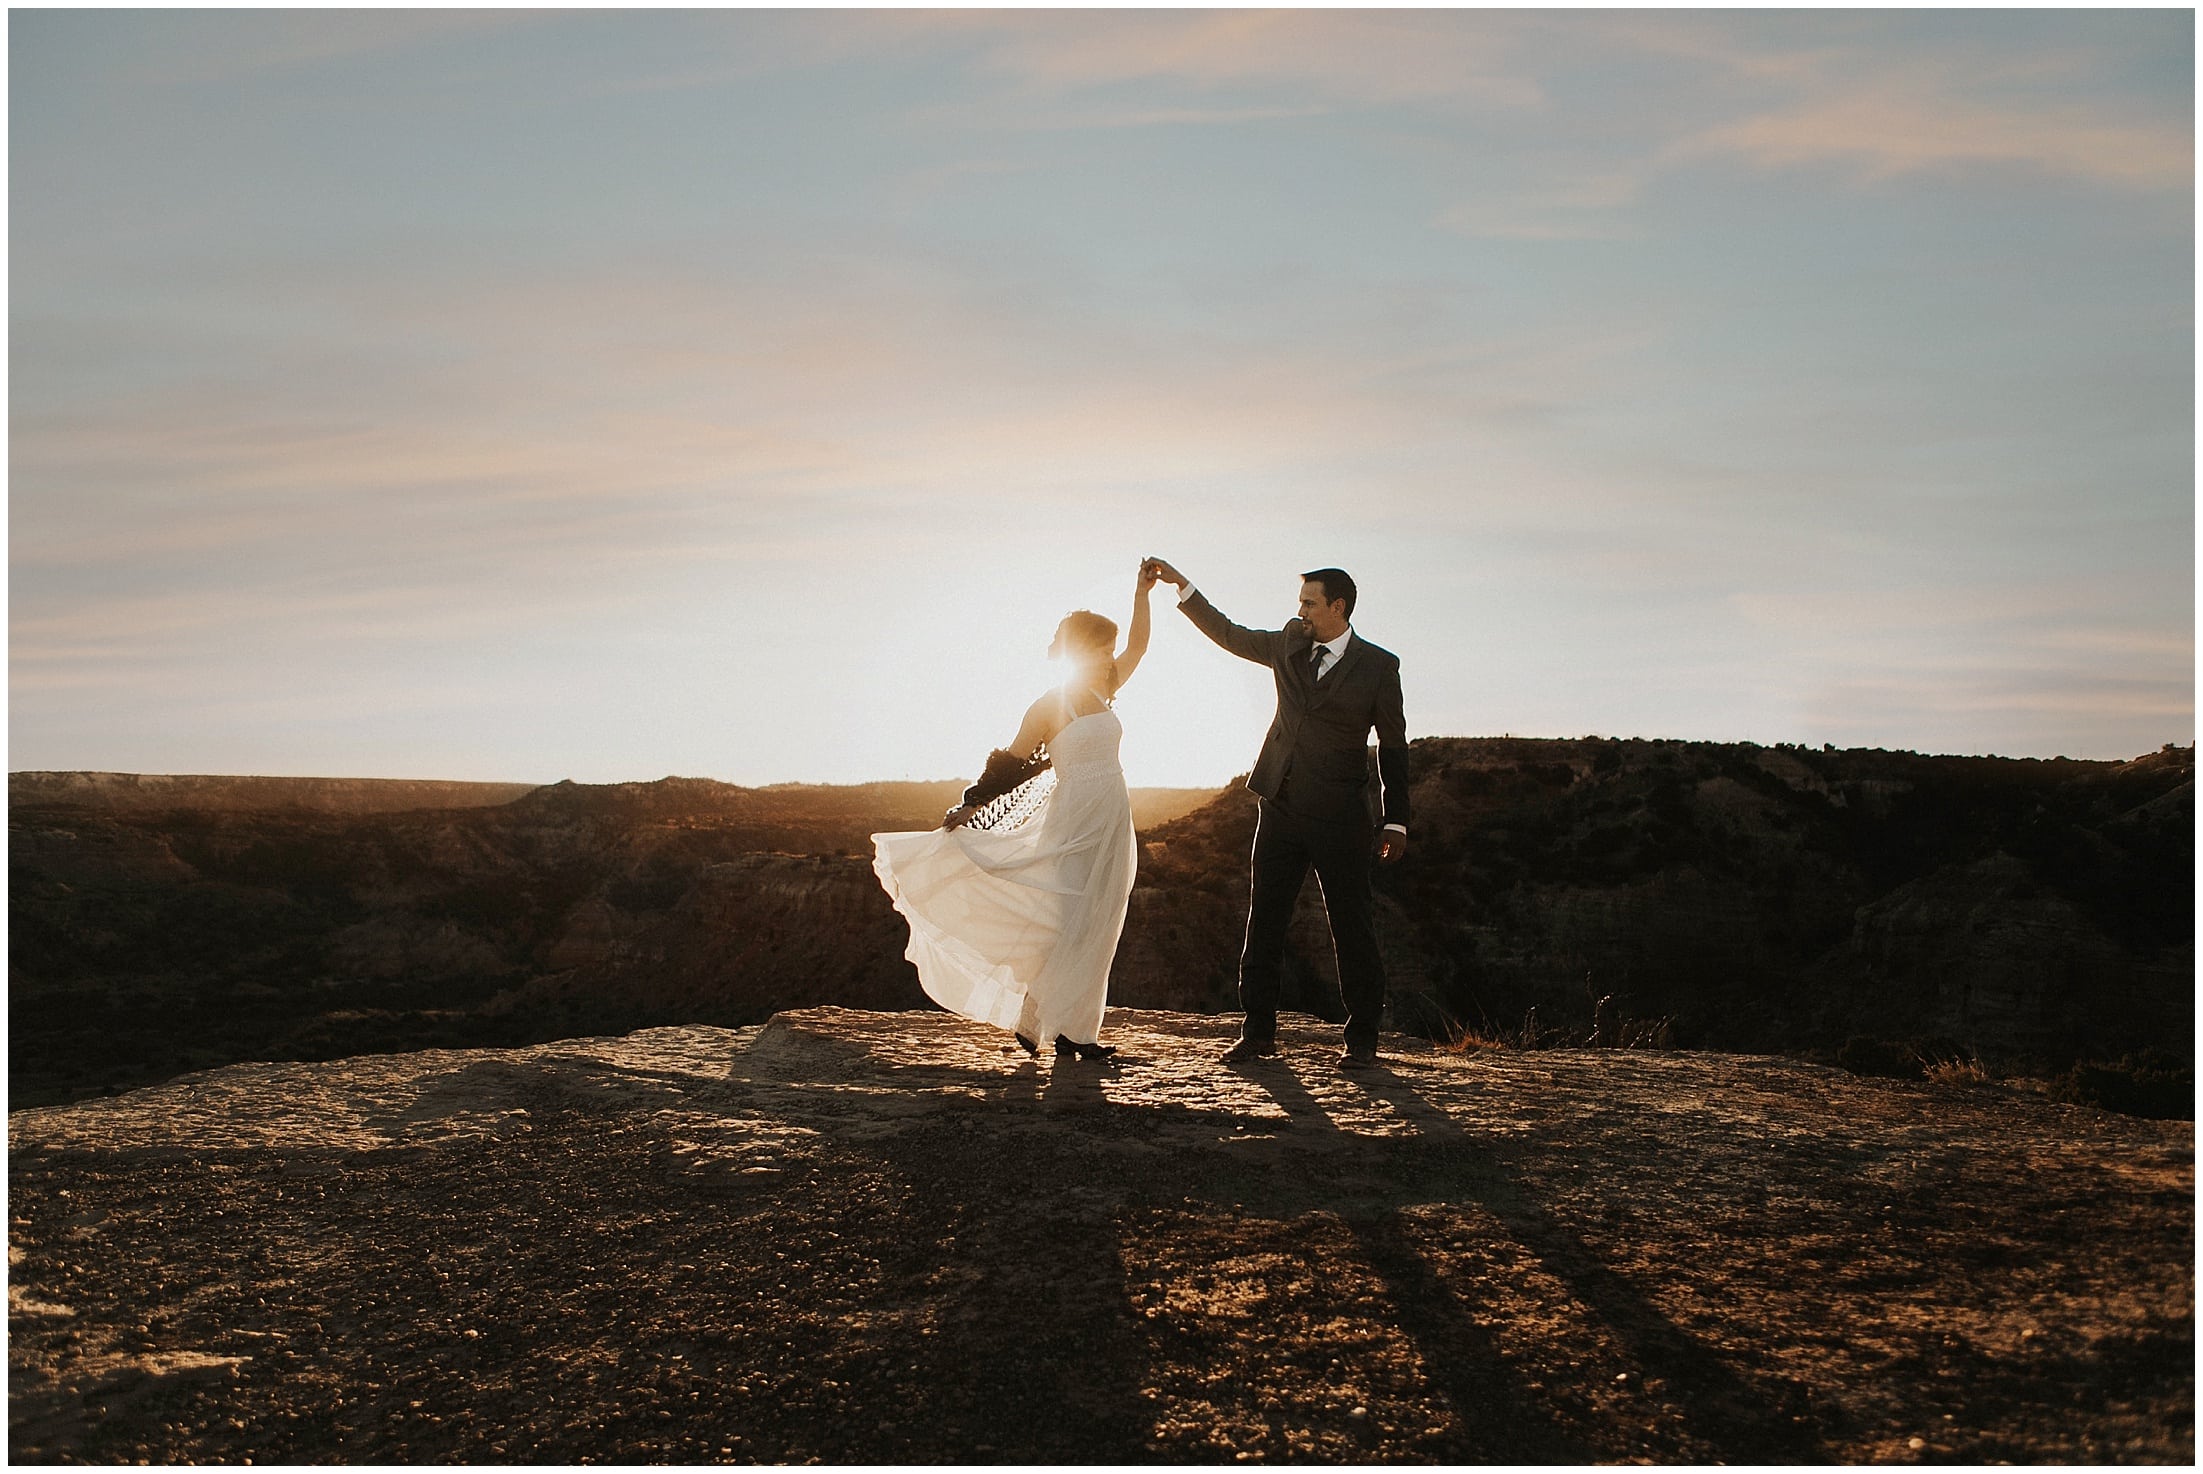 First Look, Photographer, photographer near me, wedding photographer, Blame Her Ranch, New Mexico Photographer, Old Gringo Boots, David's Bridal, Stagehead Designs, Brit Nicole Photography, styled wedding, intimate, Day After, Palo Duro Canyon, Amarillo Photographer, Texas Wedding Photographer 